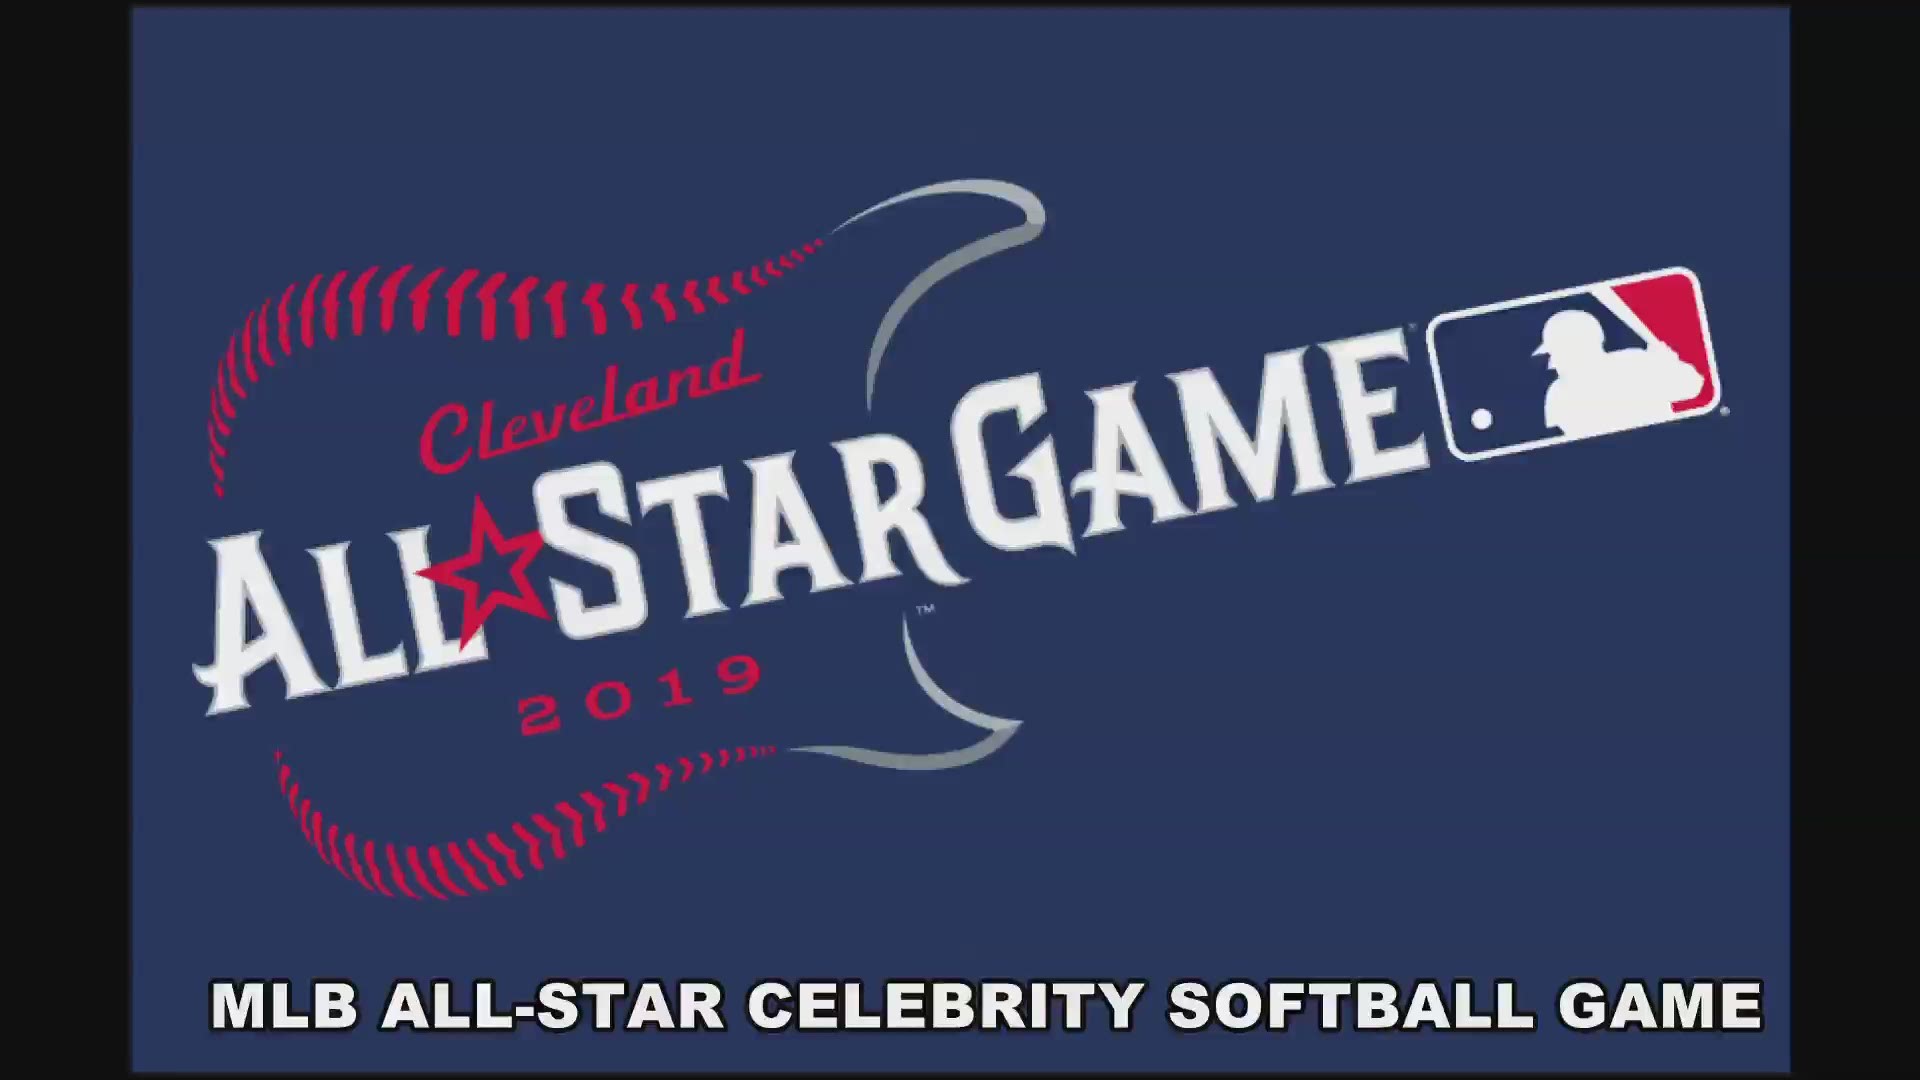 WATCH ME PLAY IN THE MLB CELEBRITY SOFTBALL GAME TONIGHT ON ESPN